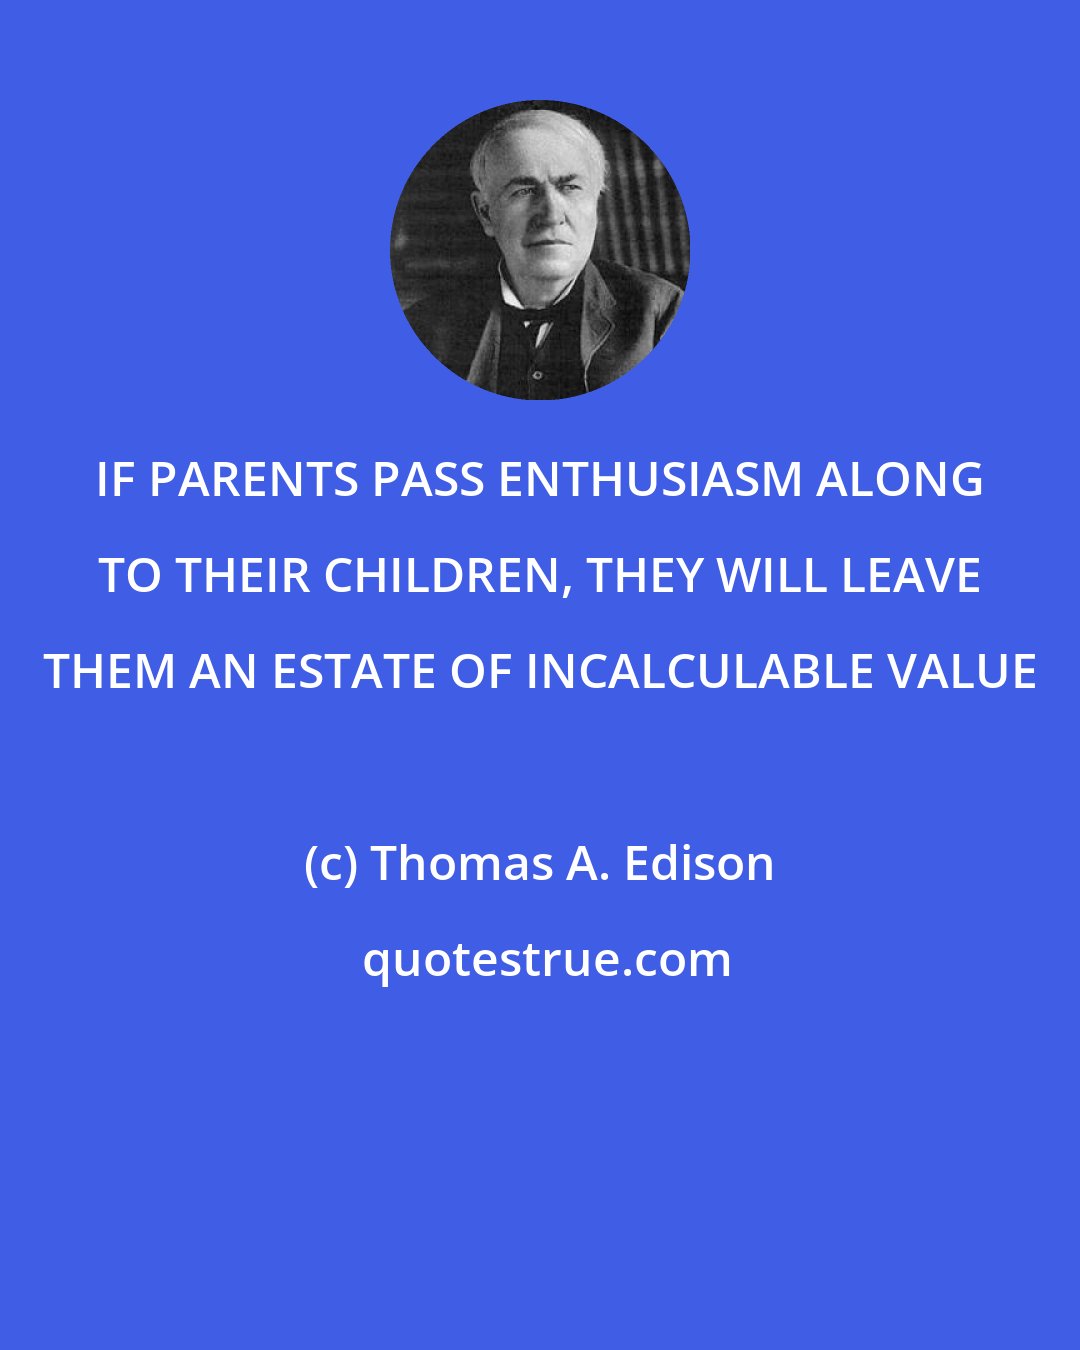 Thomas A. Edison: IF PARENTS PASS ENTHUSIASM ALONG TO THEIR CHILDREN, THEY WILL LEAVE THEM AN ESTATE OF INCALCULABLE VALUE